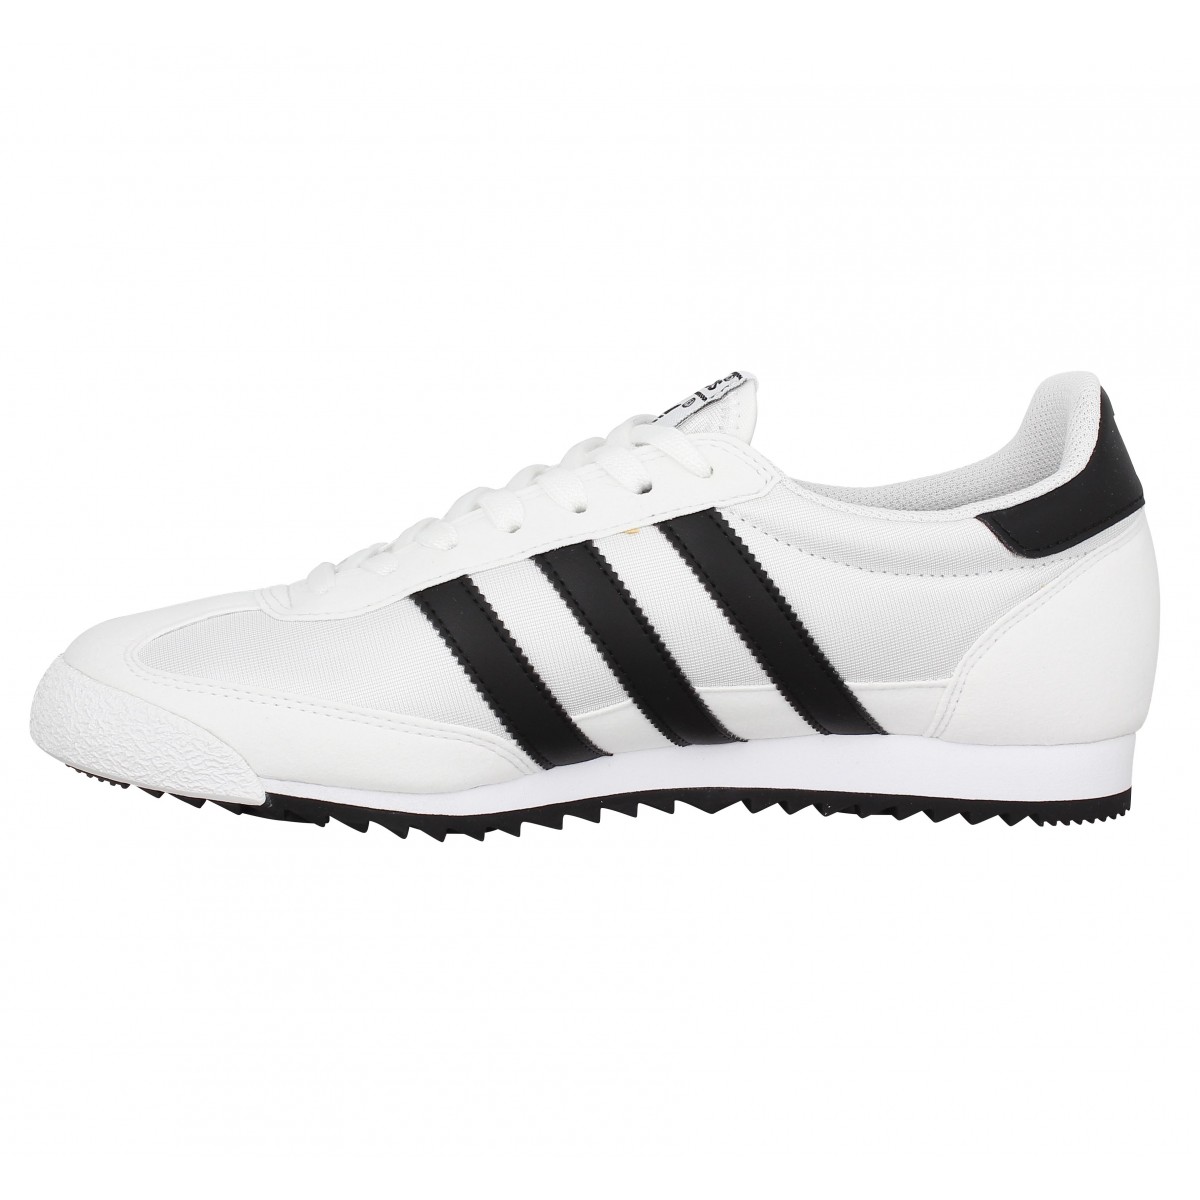 Chaussures Adidas dragon og blanc homme | Fanny chaussures